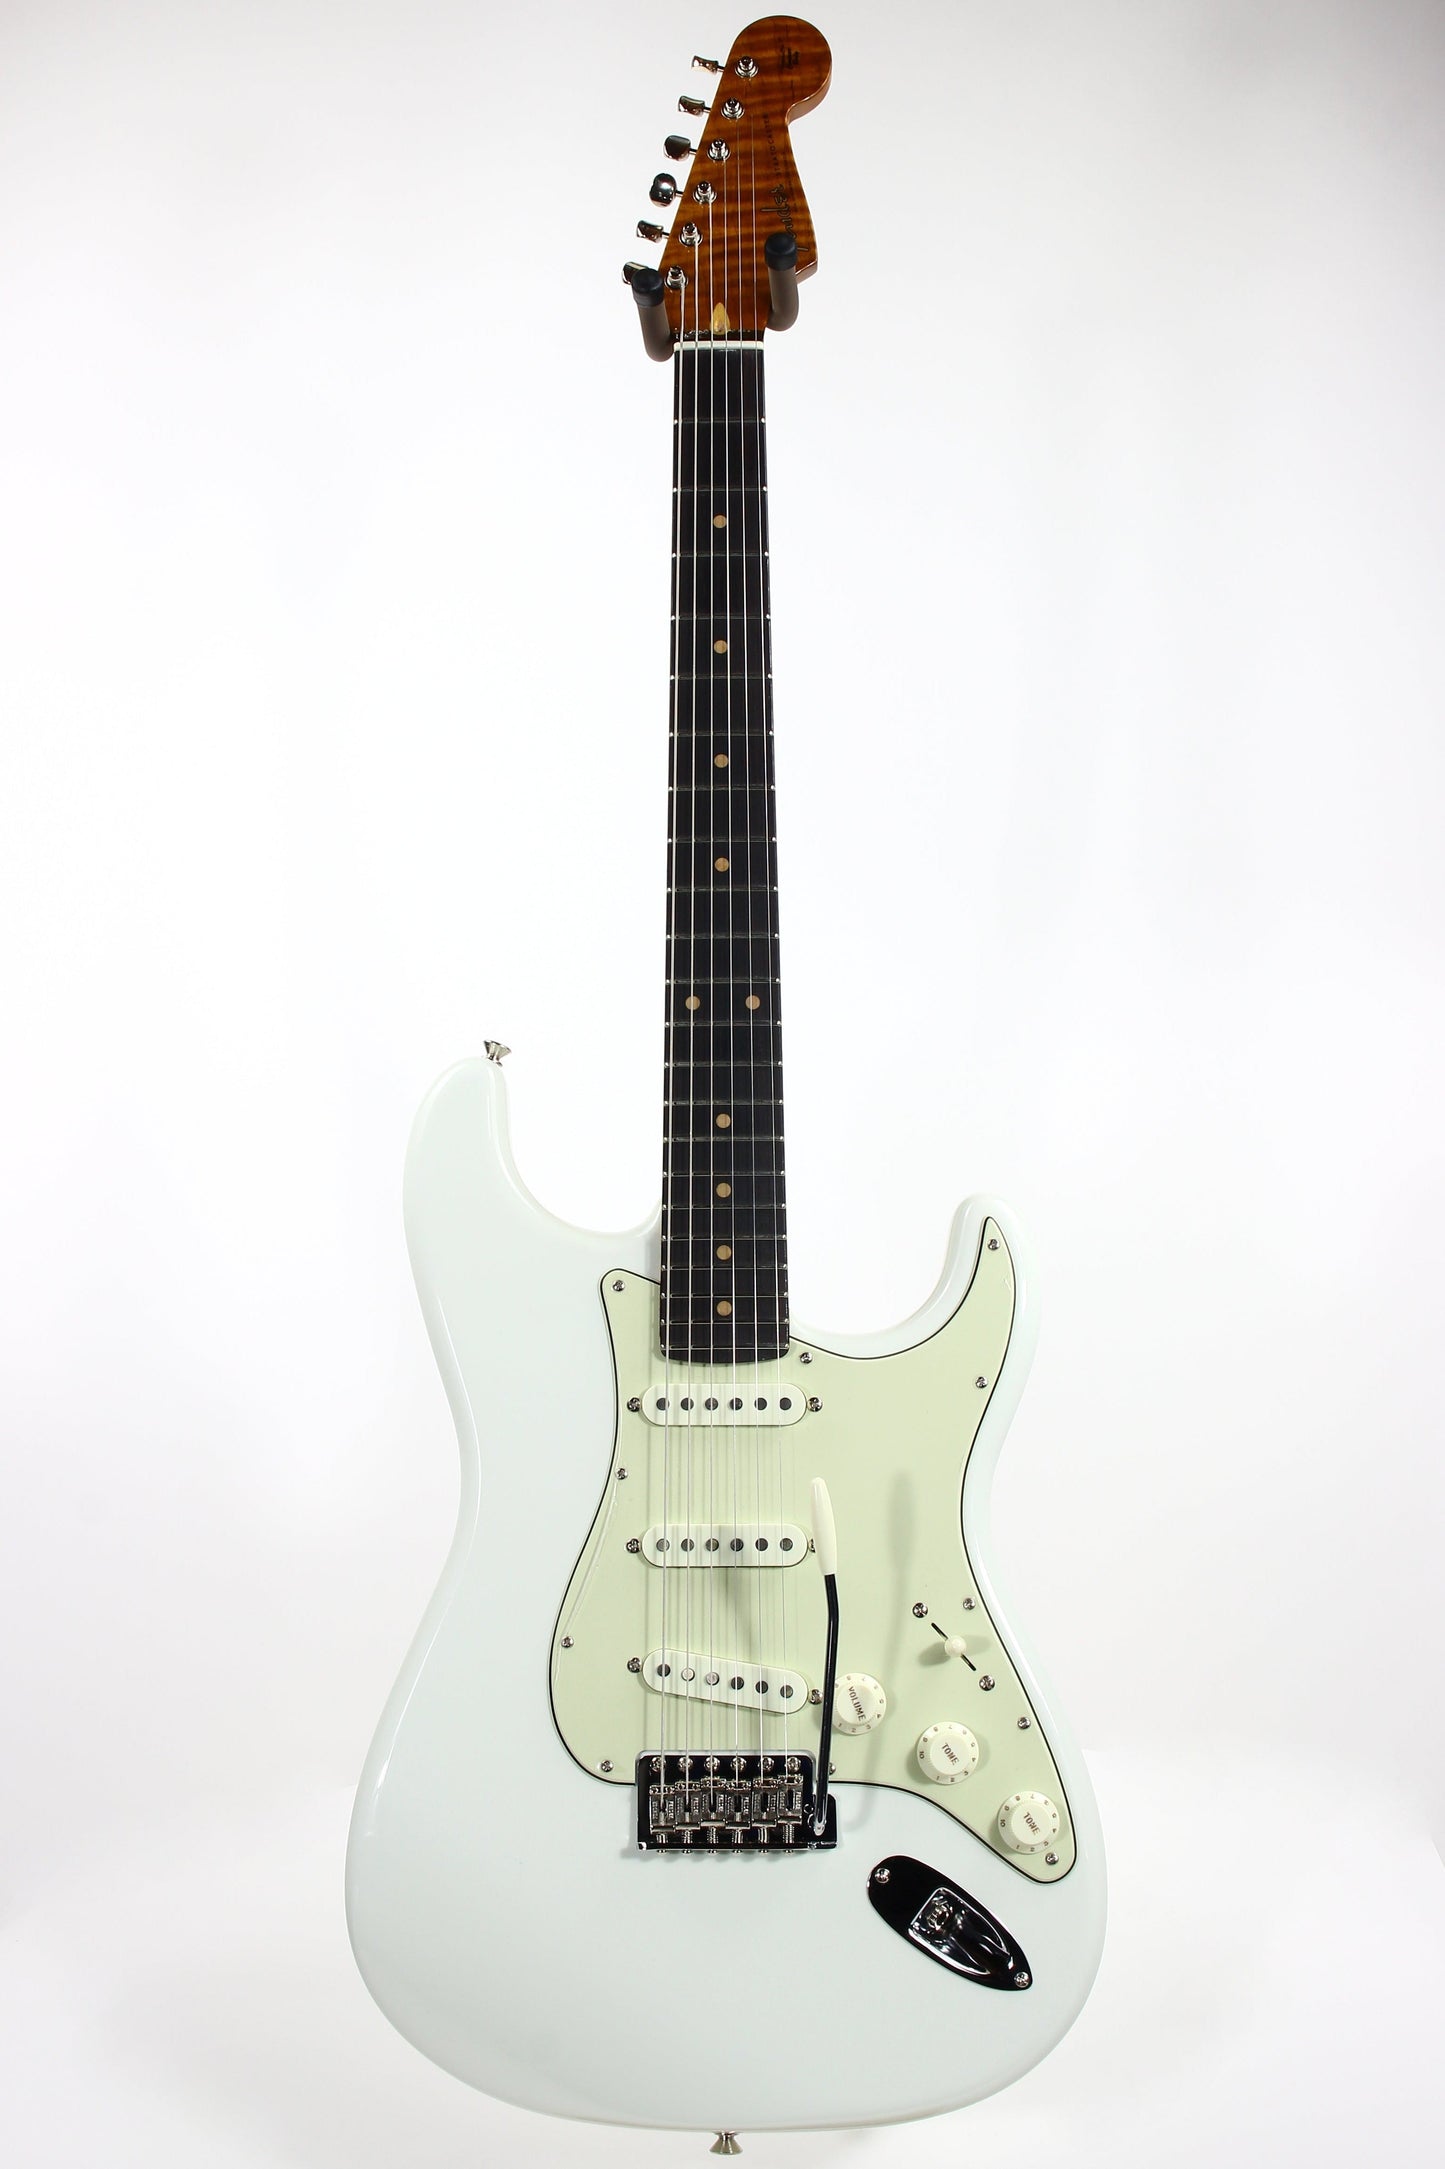 2022 Fender Custom Shop GT11 '60 Stratocaster Roasted FLAME NECK - NOS Olympic White Sweetwater Dealer Select